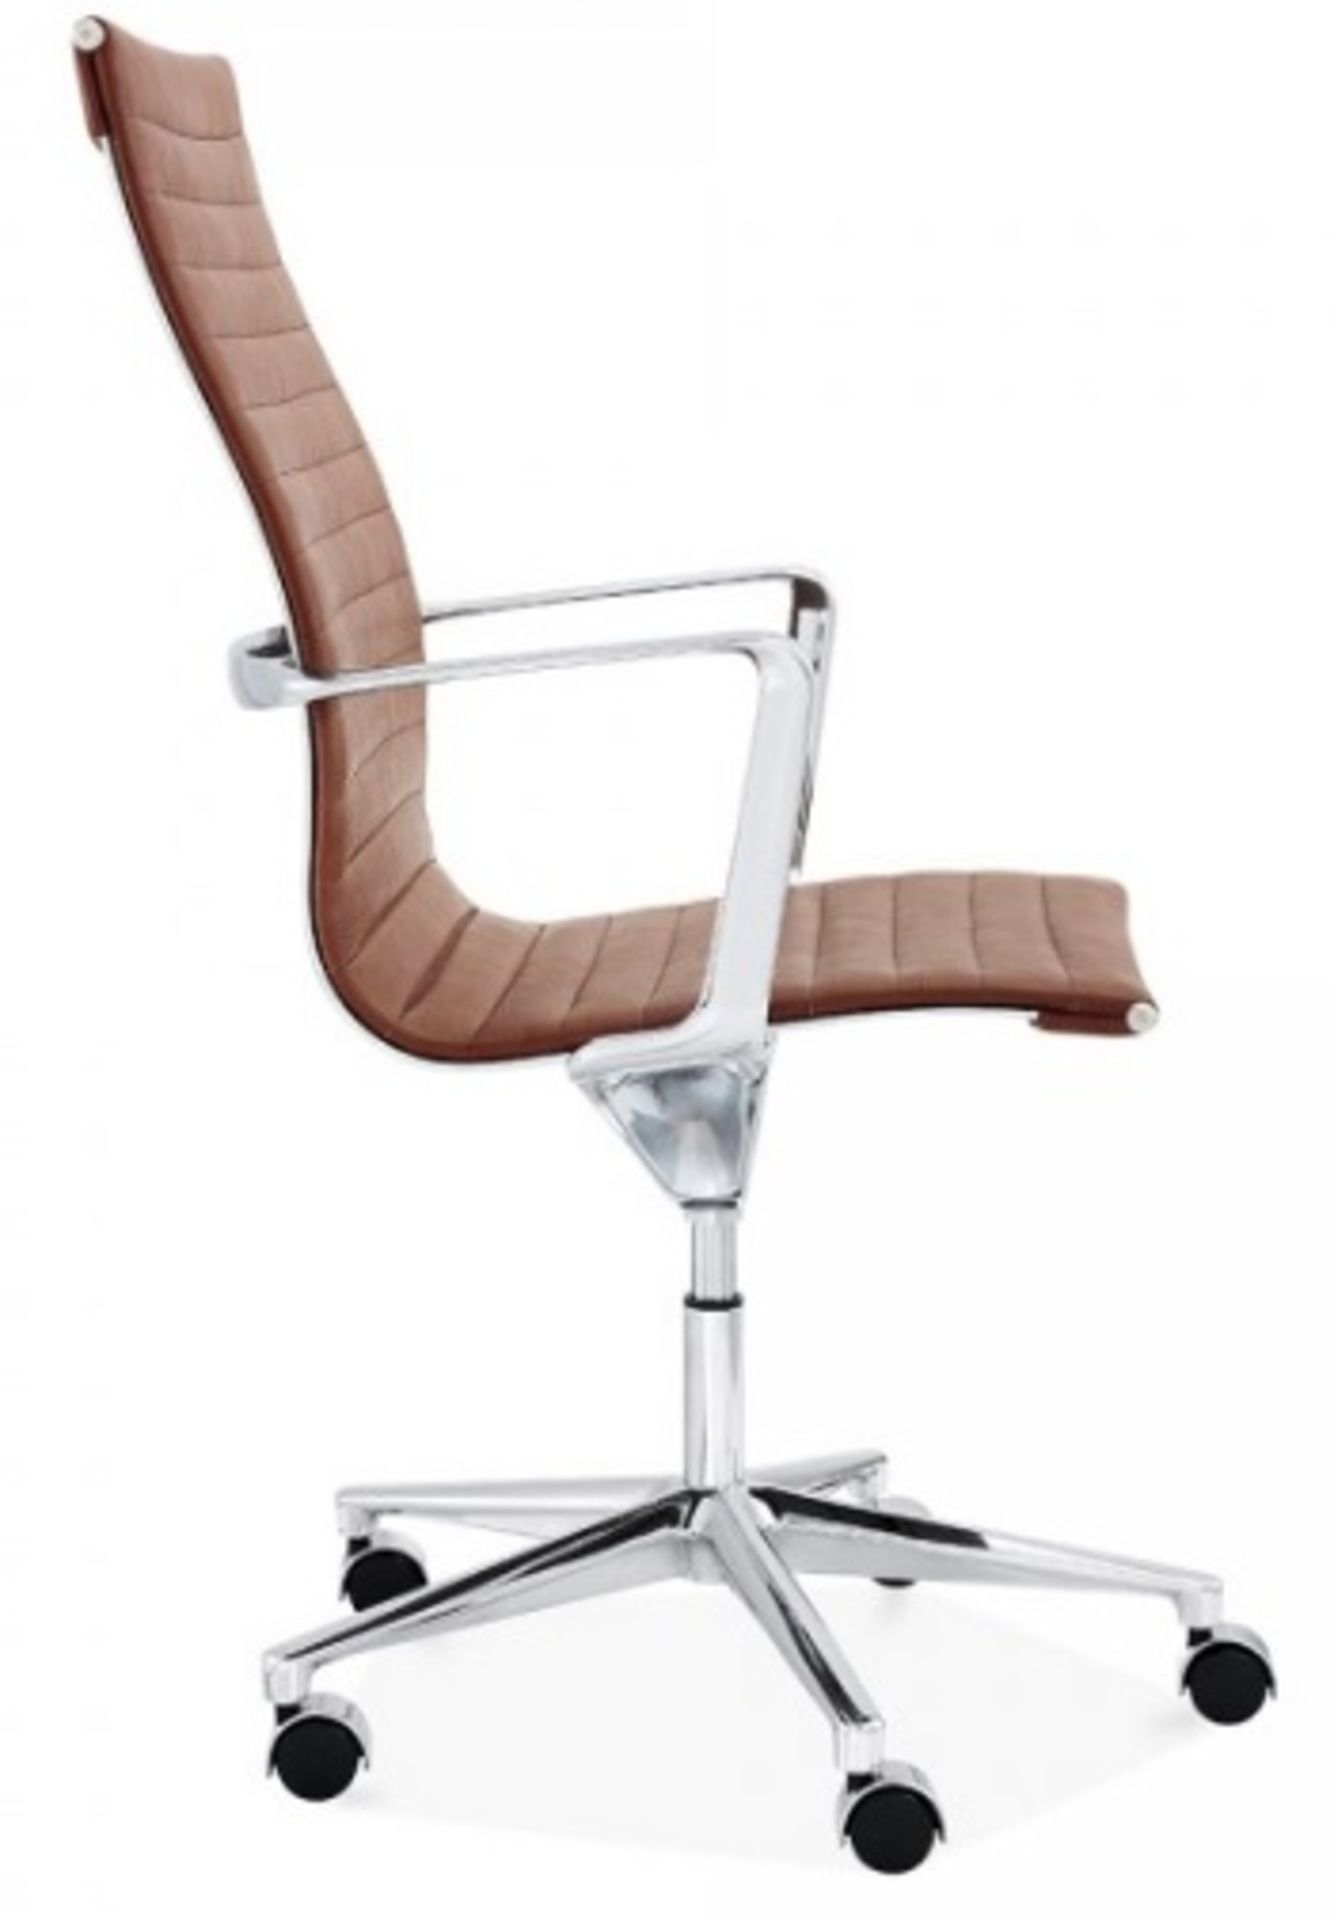 1 x LINEAR Eames-Inspired Ribbed High Back Office Swivel Chair In Brown Leather- New / Unboxed Stock - Image 3 of 5